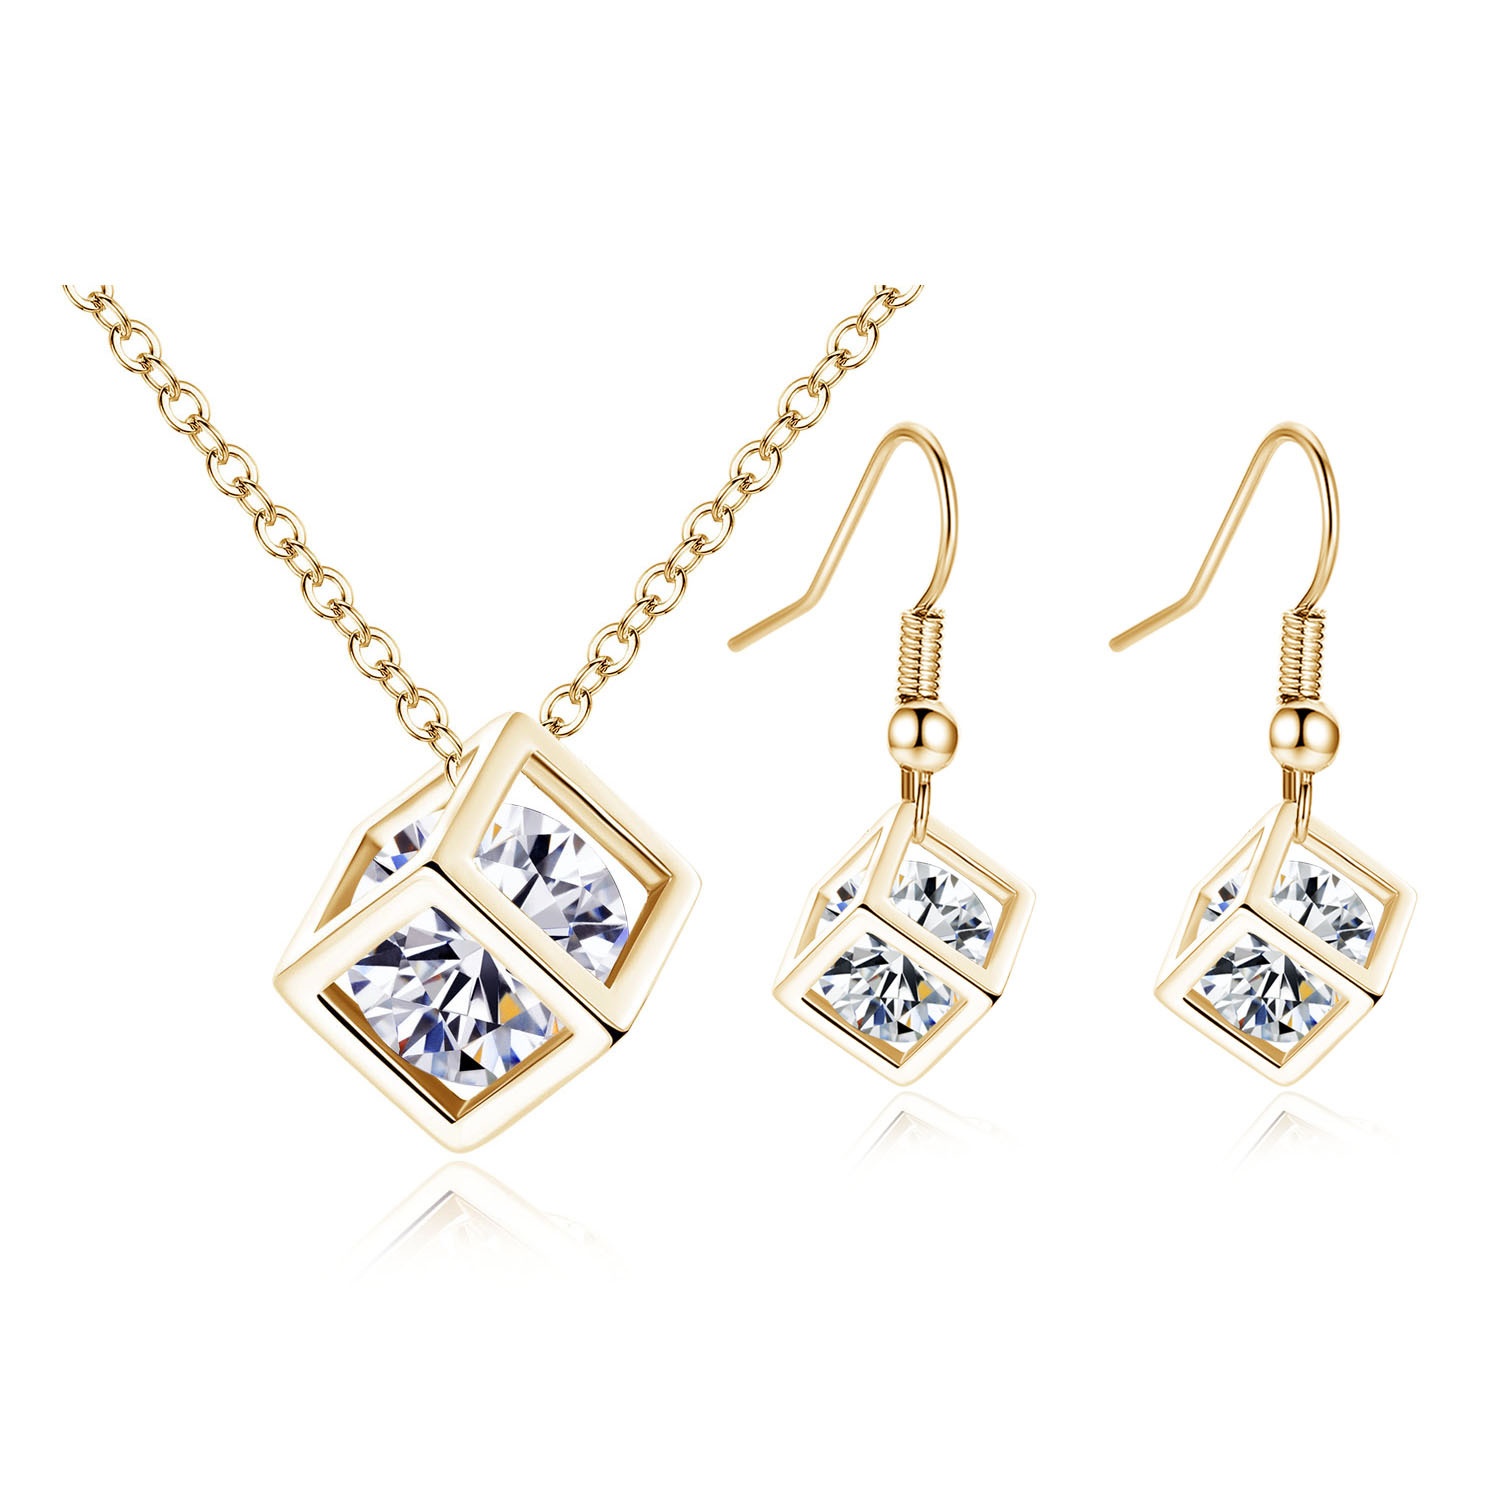 Cubic Zirconia Jewelry Set | Crystals inside a Cube Earrings & Necklace